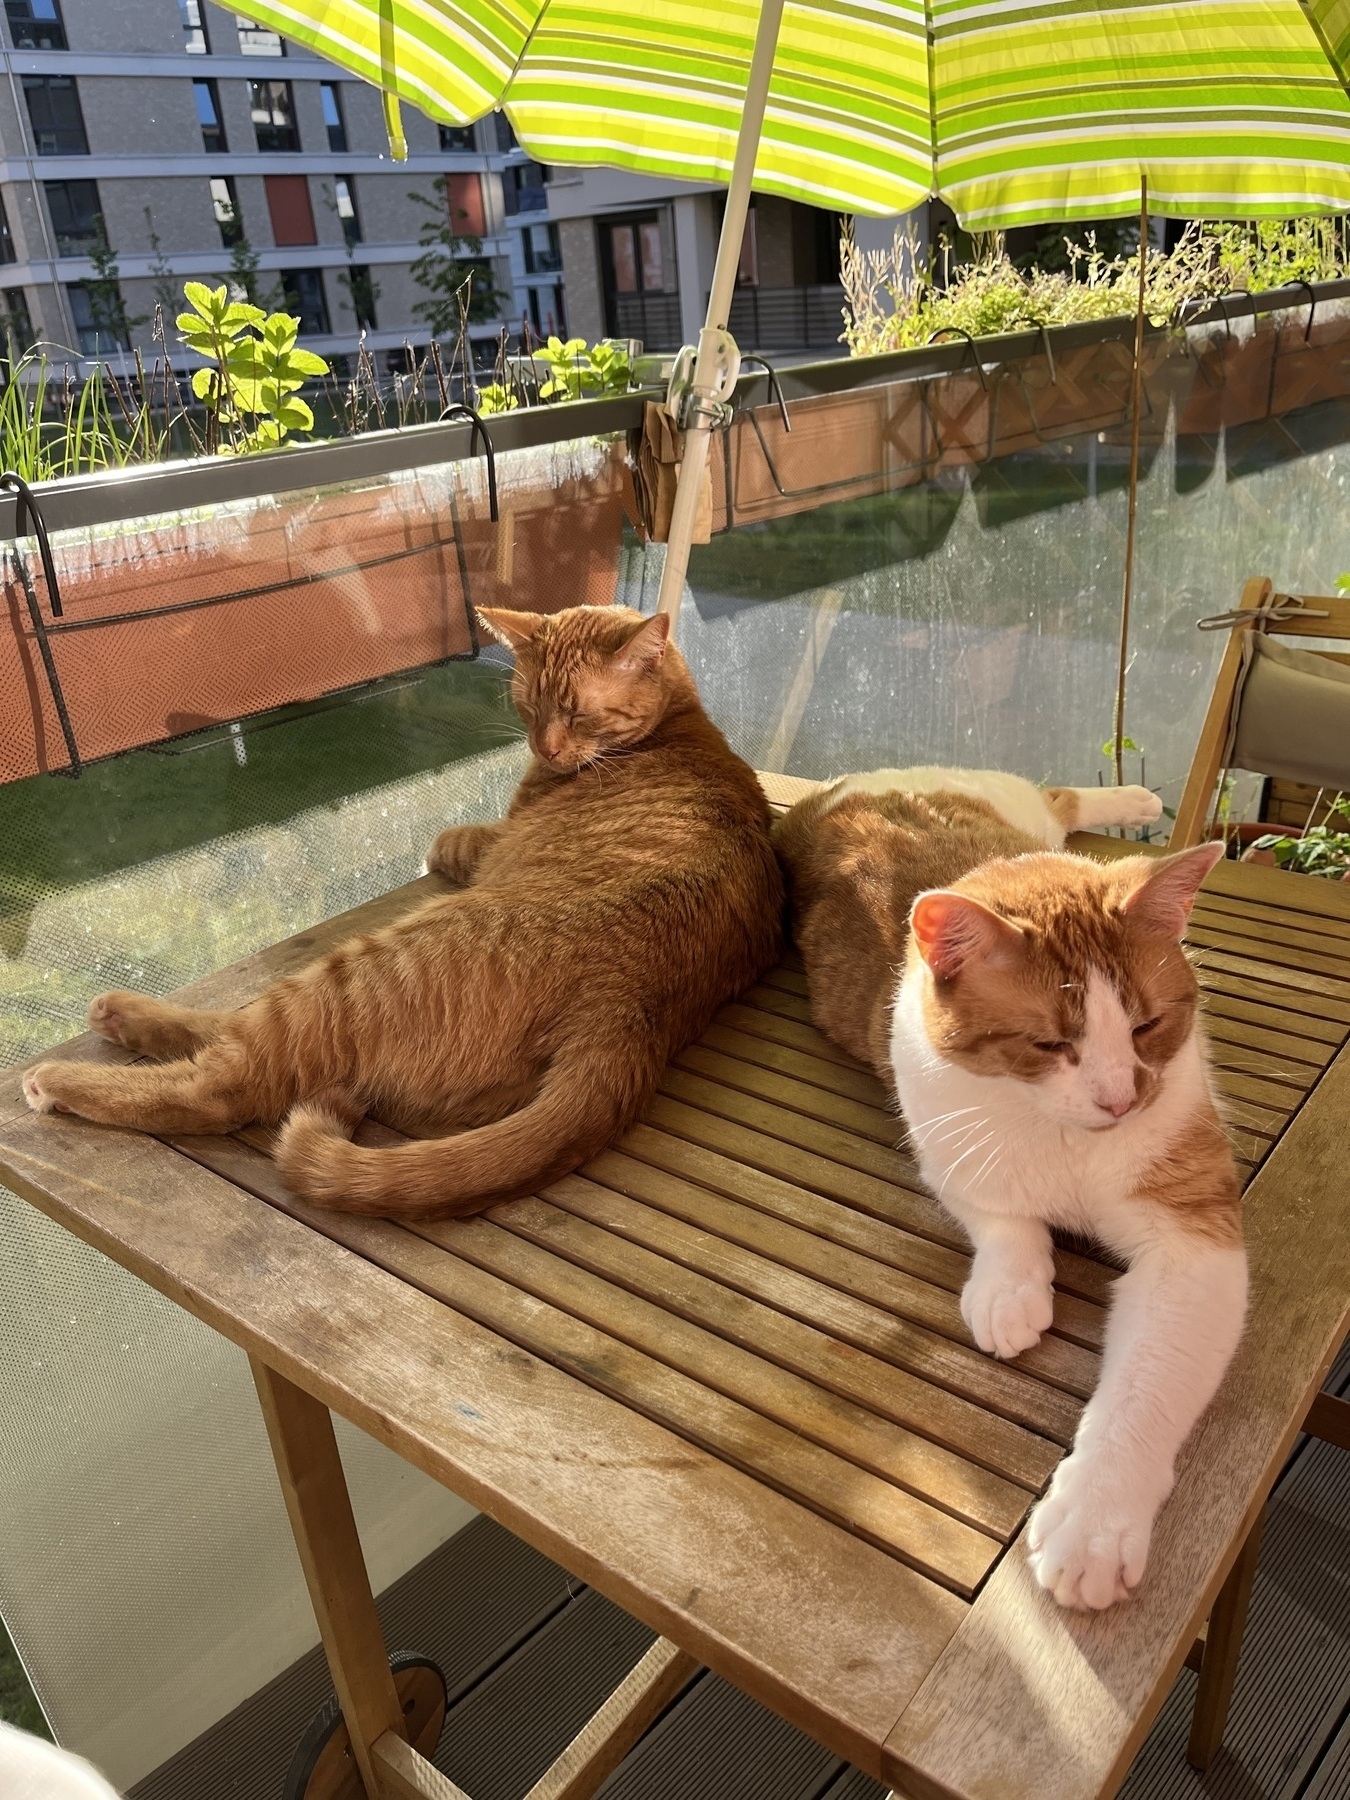 Two cats chilling in the shadow on a table